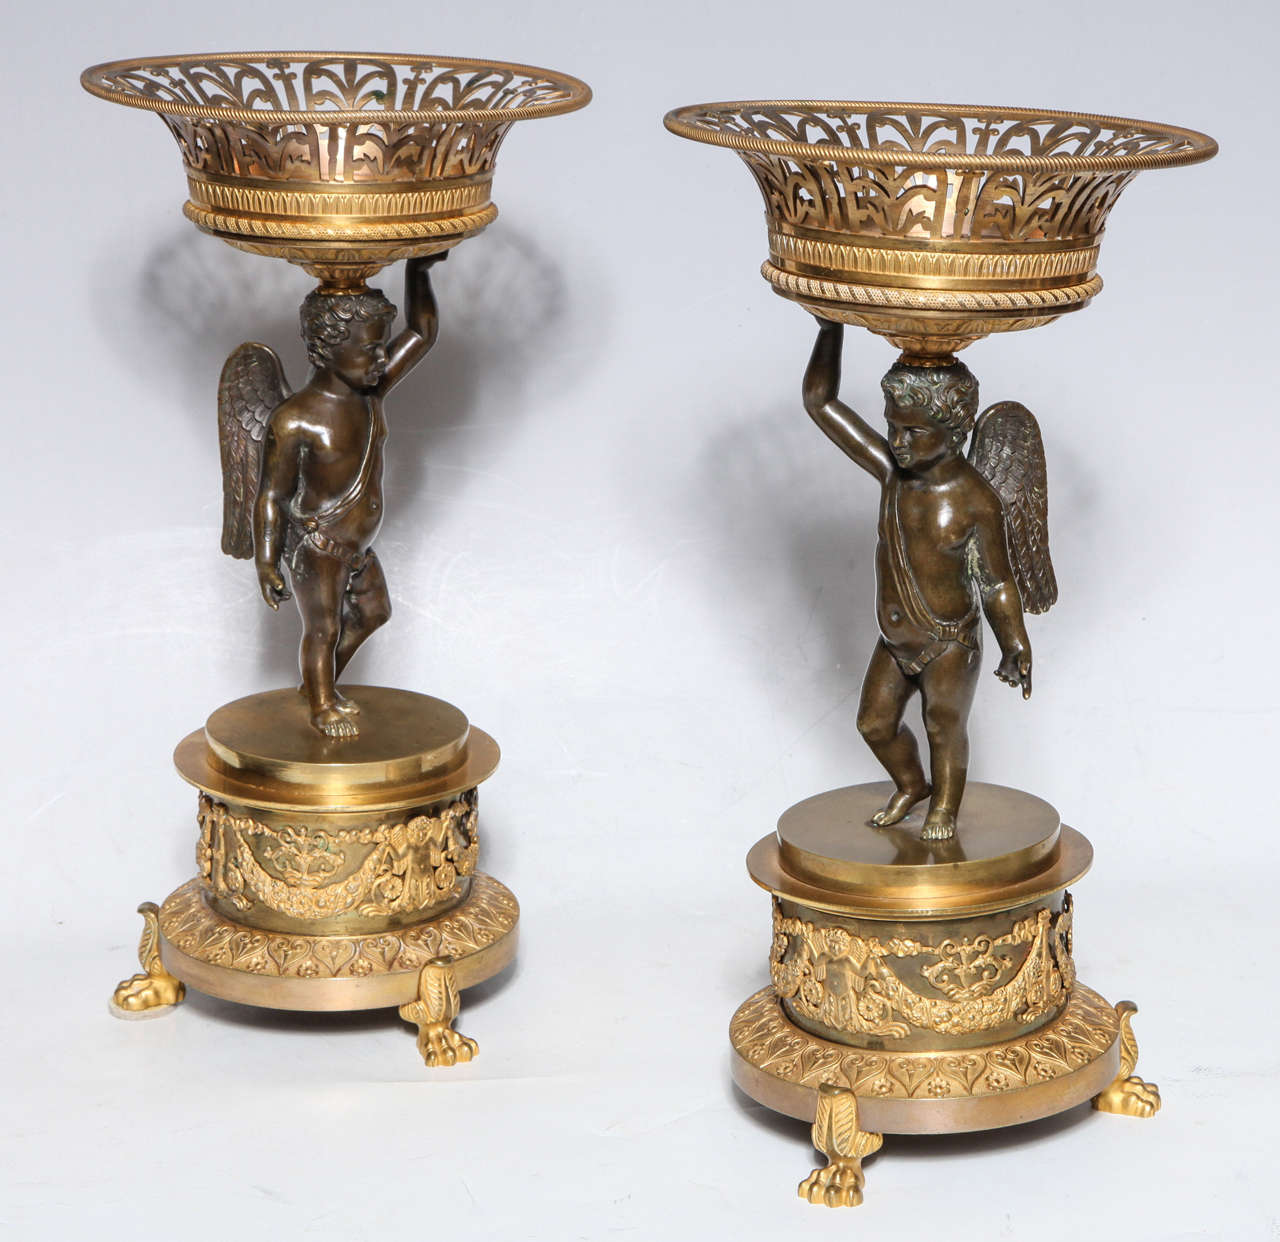 Pair of Russian Empire period gilt and patinated bronze cupid compote centrepieces with gilt bronze filigree baskets. The cupids pose in contrapposto holding two toned gilt bronze filigree baskets on their heads, 

circa 1810.